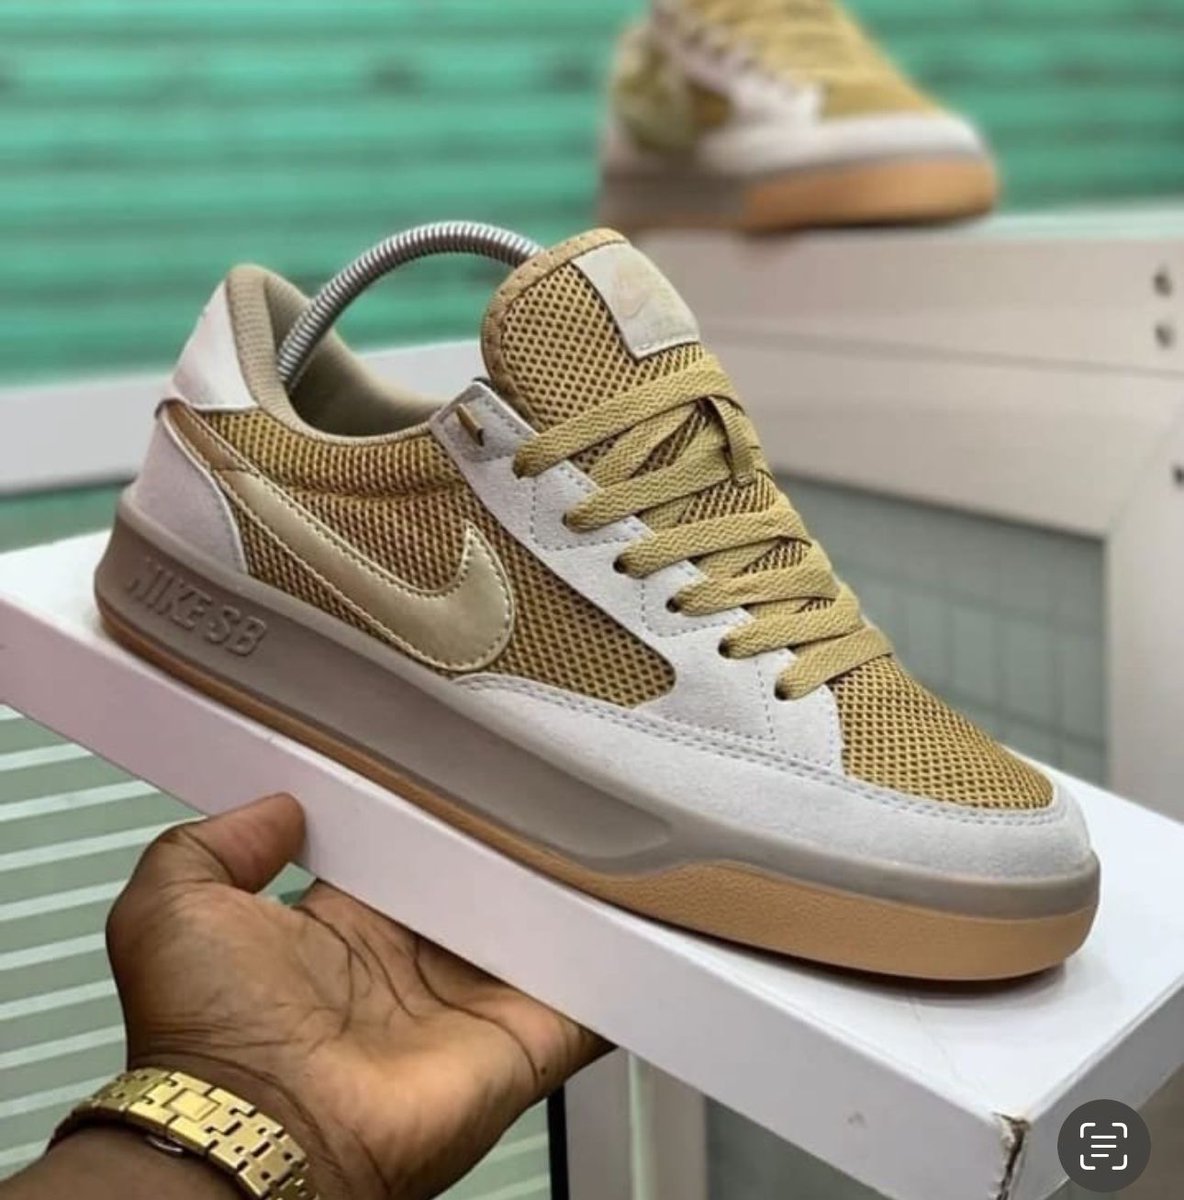 Buy and sell NIKE SB shoes at the best price on Stock. Available in Size 40-43 Ksh 3500 To get one 📞0703264421 or join our community to view the various items in stock chat.whatsapp.com/G4o6sjIhmCJ3xA… Sell Tanzania Kiambu Kikuyus profit boom pearl rice tv 47